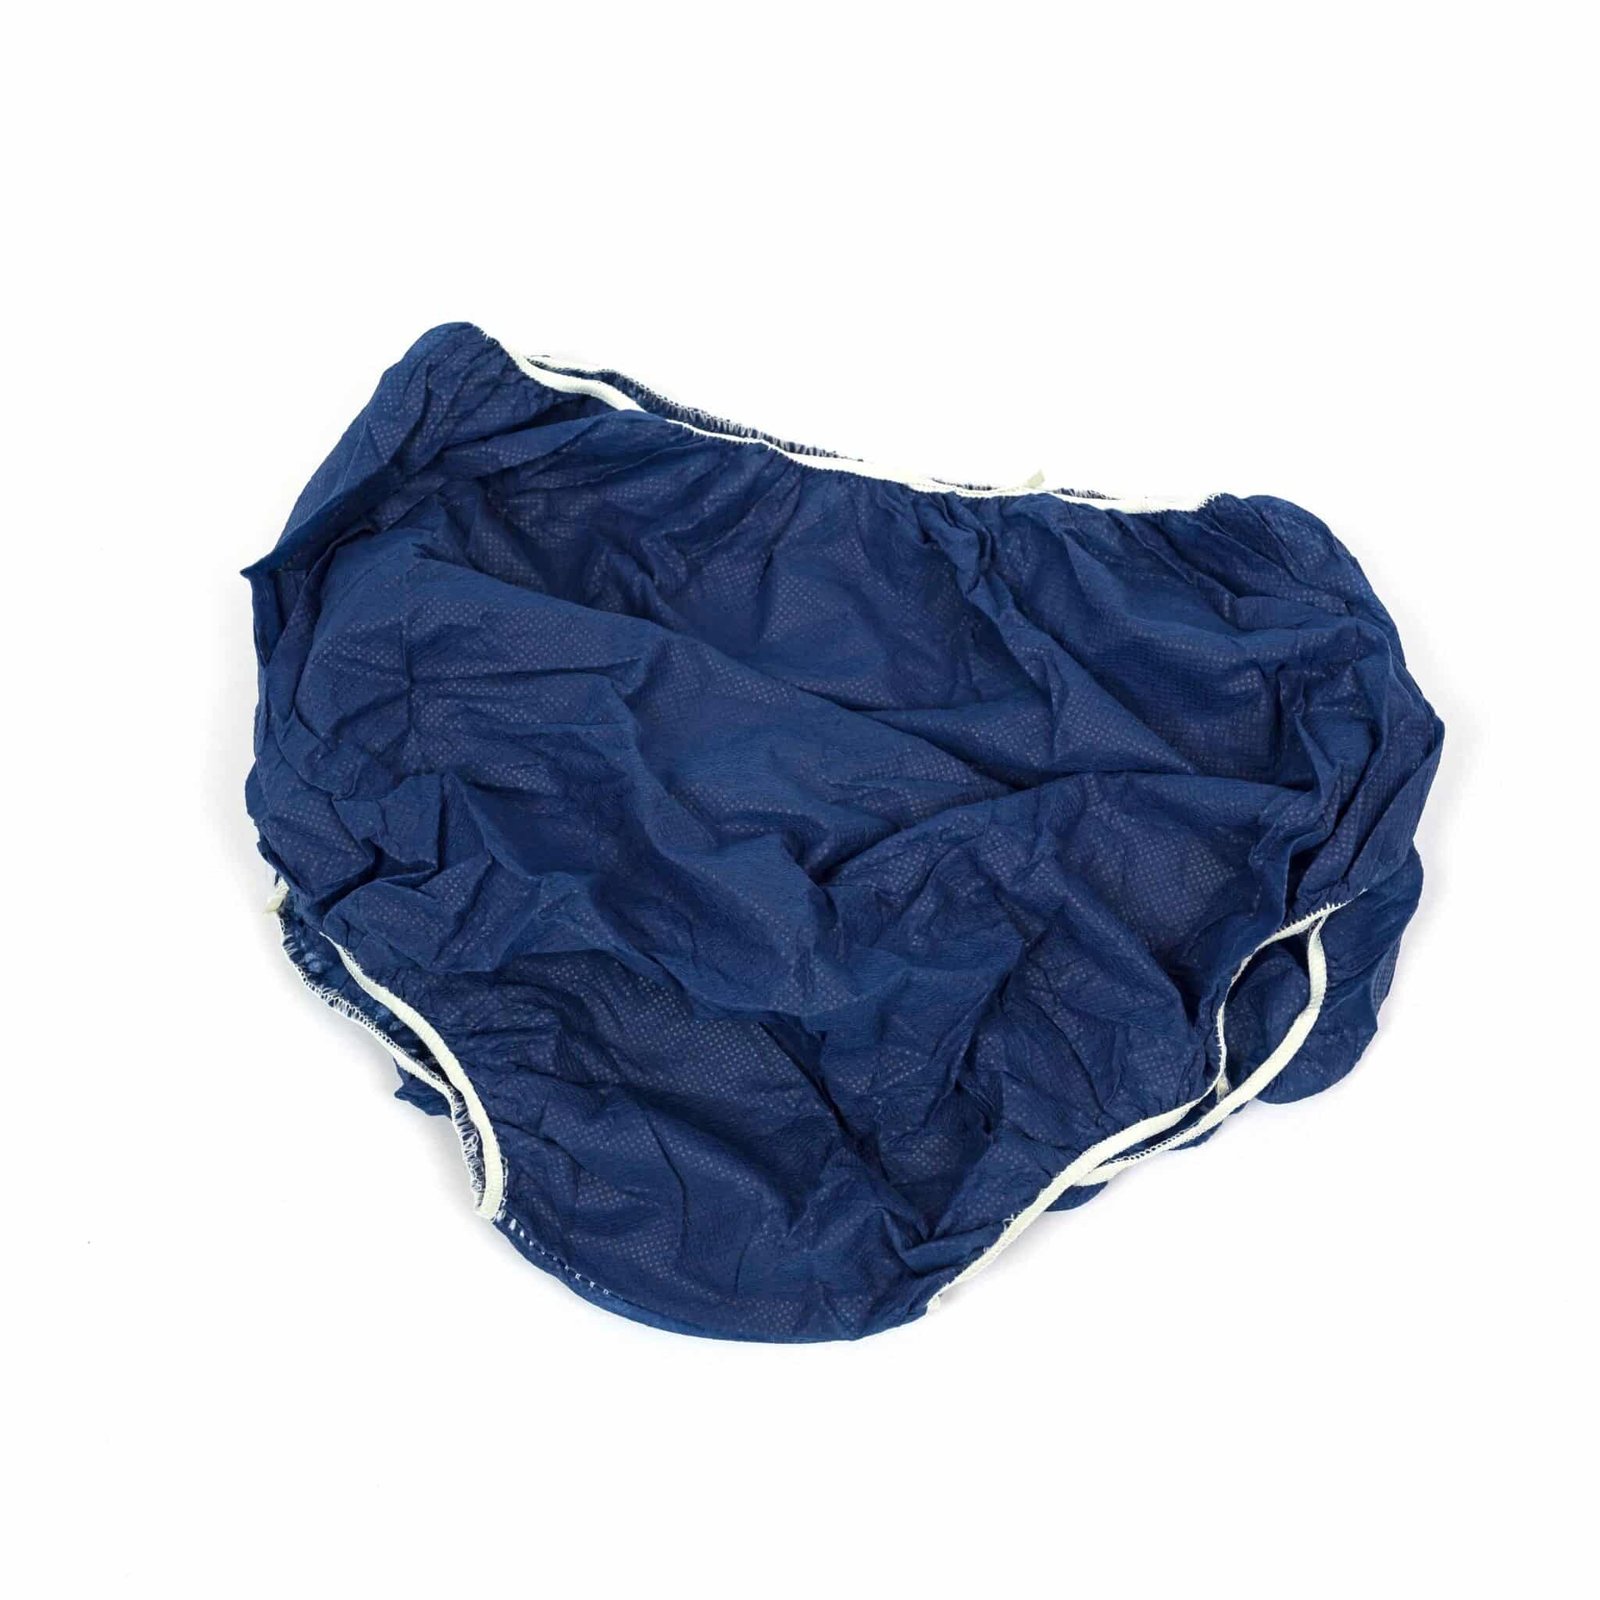 Disposable Underwear for Men/Women Non-Woven Panties Briefs for Travel Spa  or Spray Tanning (Color : Blue, Size : 50 Pieces)